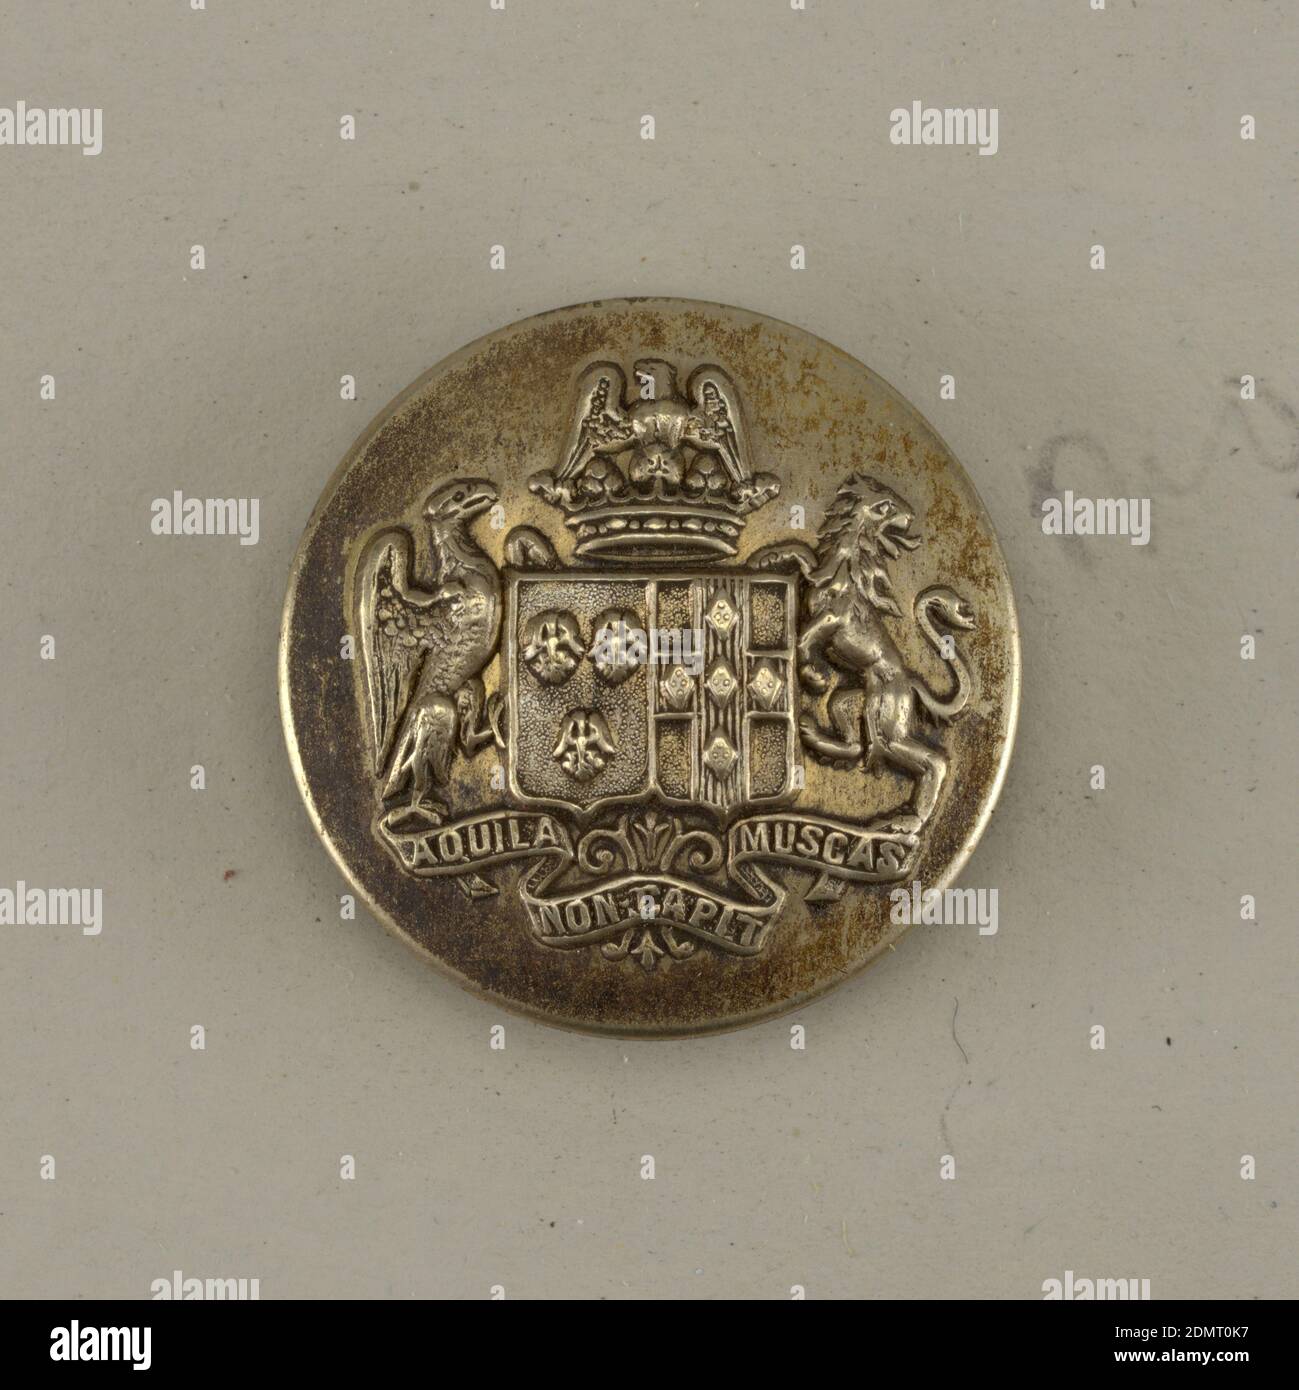 Button, Nickel, brass, Circular, slightly convex button with ornament showing a shield with heraldic devices, eagle and lion supporters, a crown above and below, ribbon with 'Aquila non capit Muscas'. Brass back and shank. On reverse: 'C T paris'. 'Perfectionne' on belt with buckle., On card E, France, 1801–50, costume & accessories, Decorative Arts, Button Stock Photo